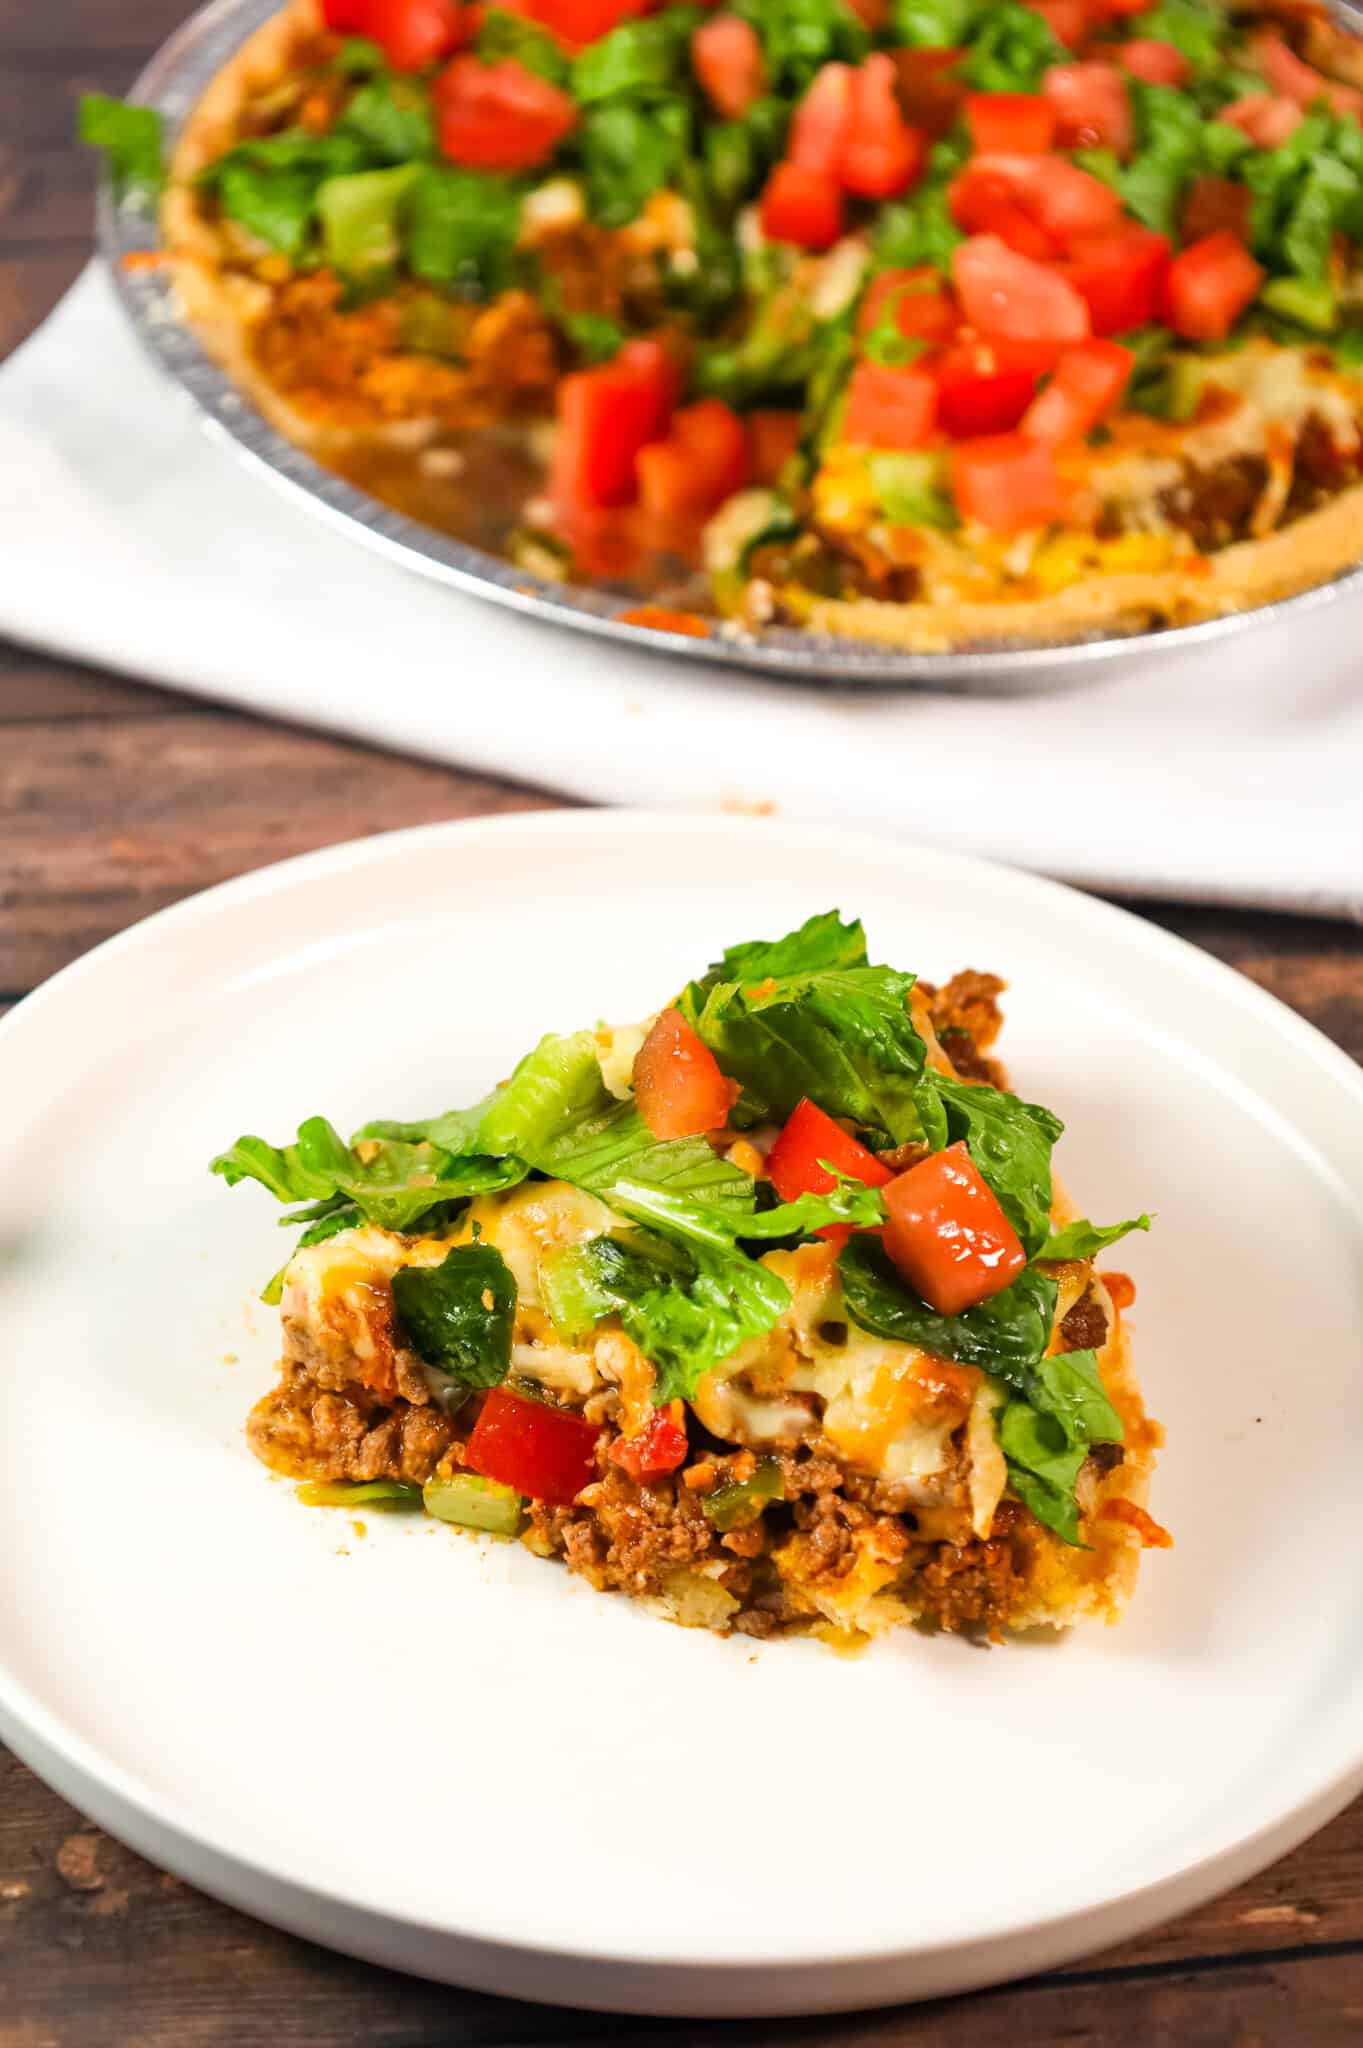 Taco Pie is an easy weeknight dinner recipe using a store bought pie crust loaded with ground beef, green peppers, Rotel and cheese.